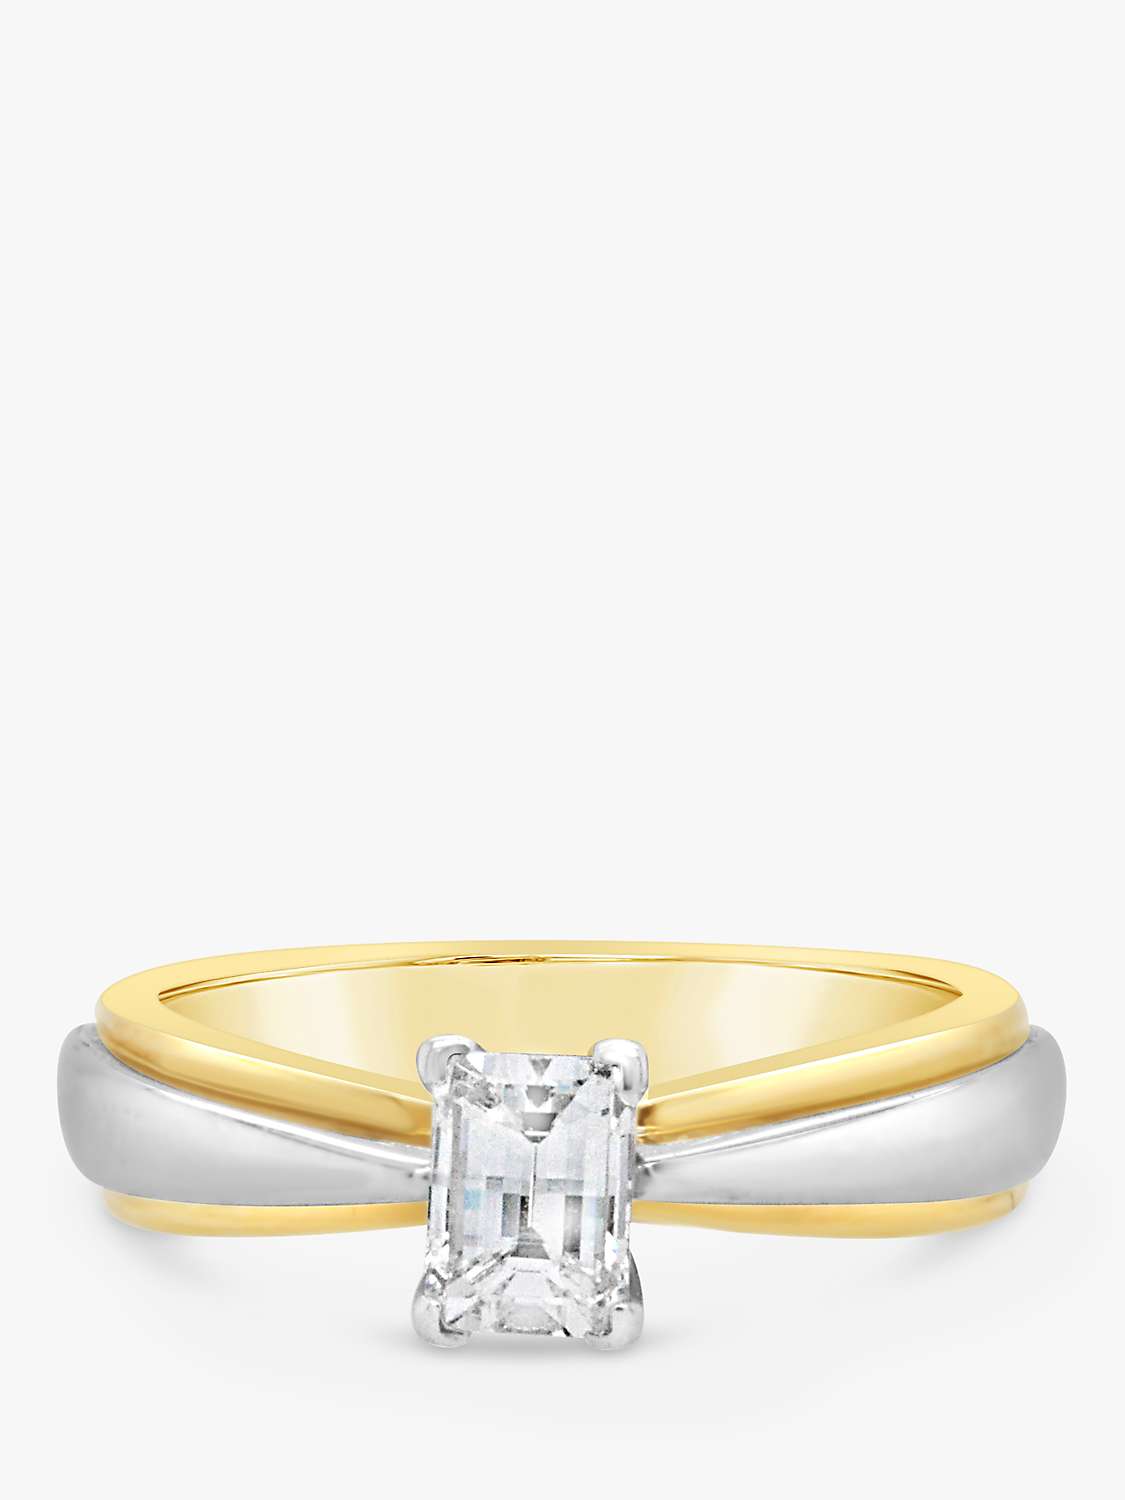 Buy Milton & Humble Jewellery Second Hand 18ct White & Yellow Gold Solitaire Diamond Engagement Ring Online at johnlewis.com